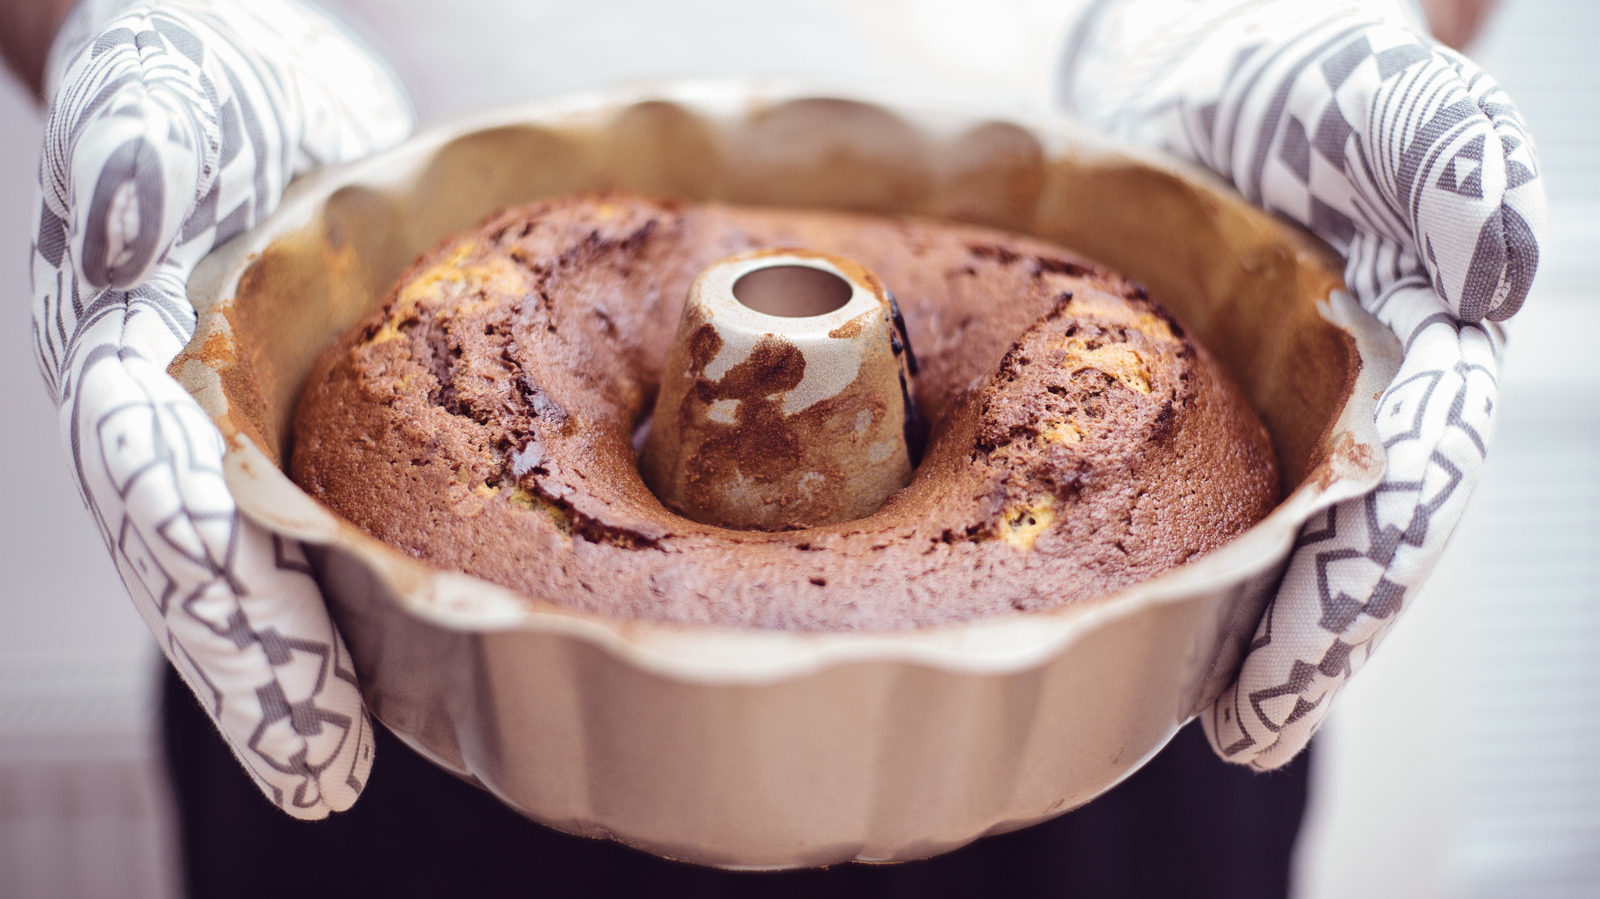 How to Make Your Own DIY Bundt Pan